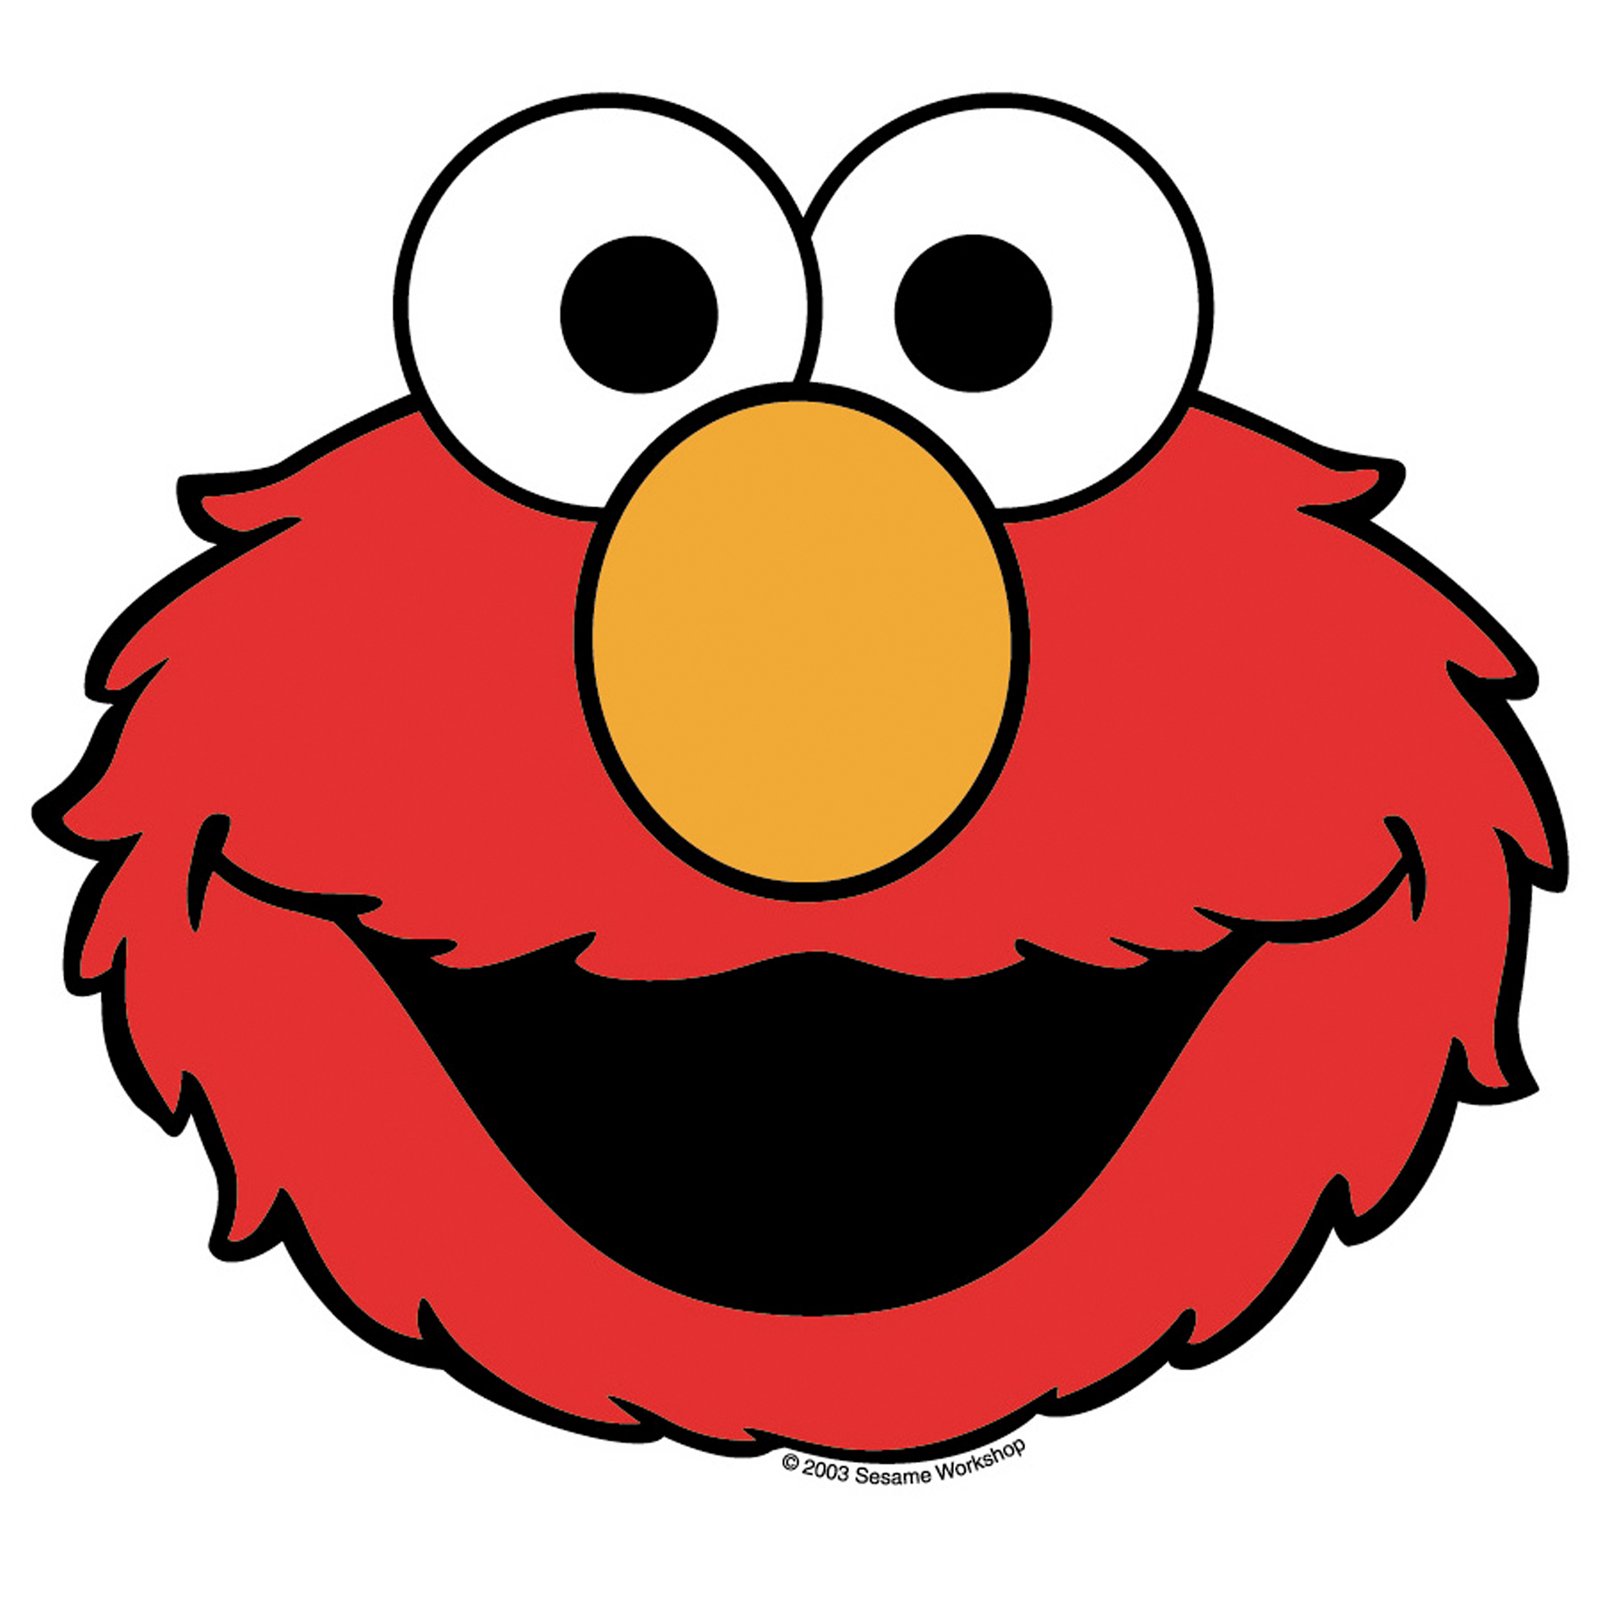 7 Best Images of Free Printable Elmo Templates - Elmo Face ...